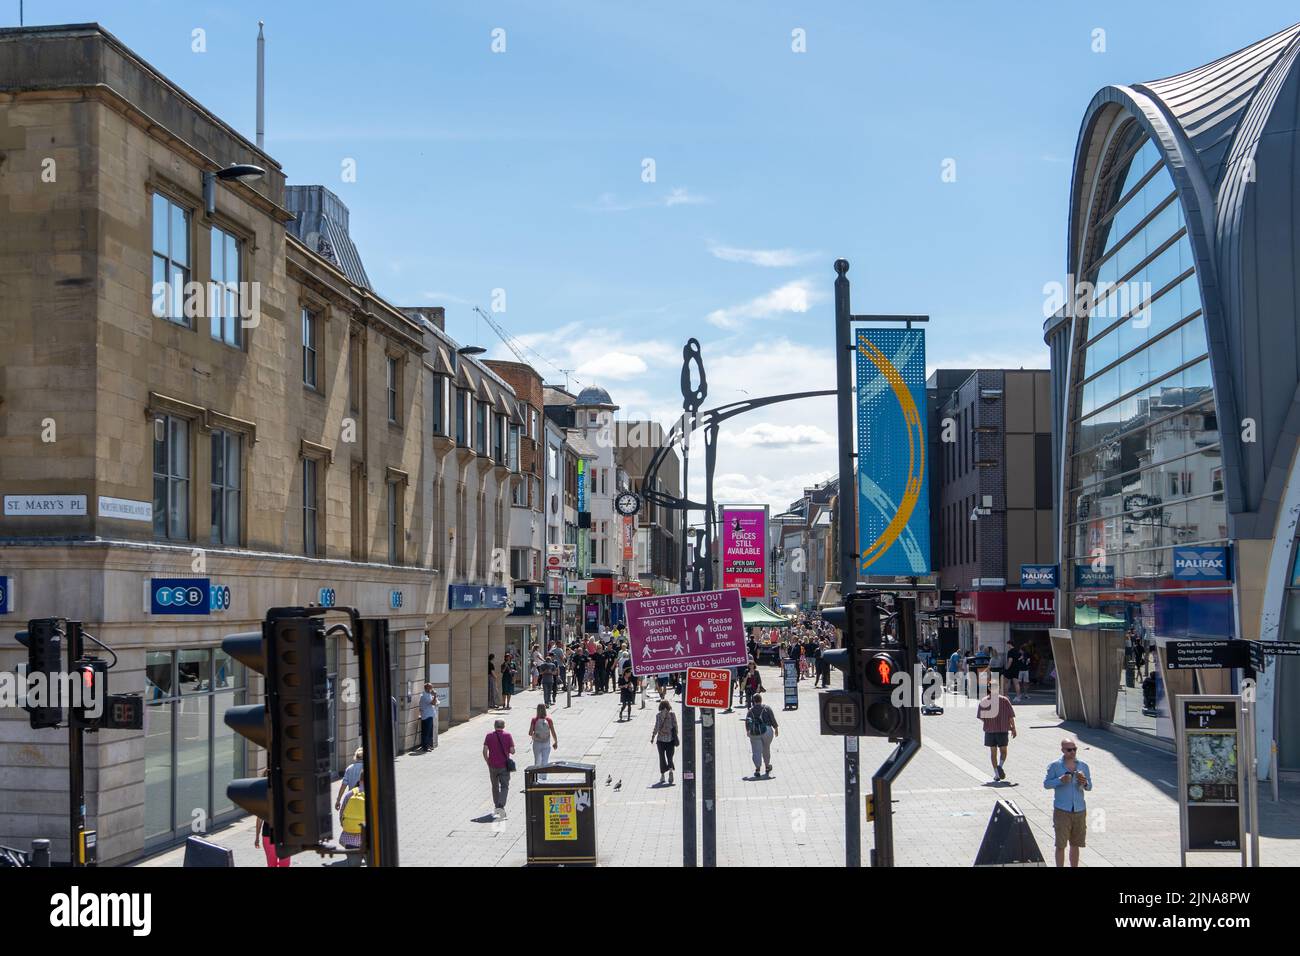 People walking around the Haymarket, on Northumberland Street, the main street in the city centre of Newcastle upon Tyne, UK. Stock Photo